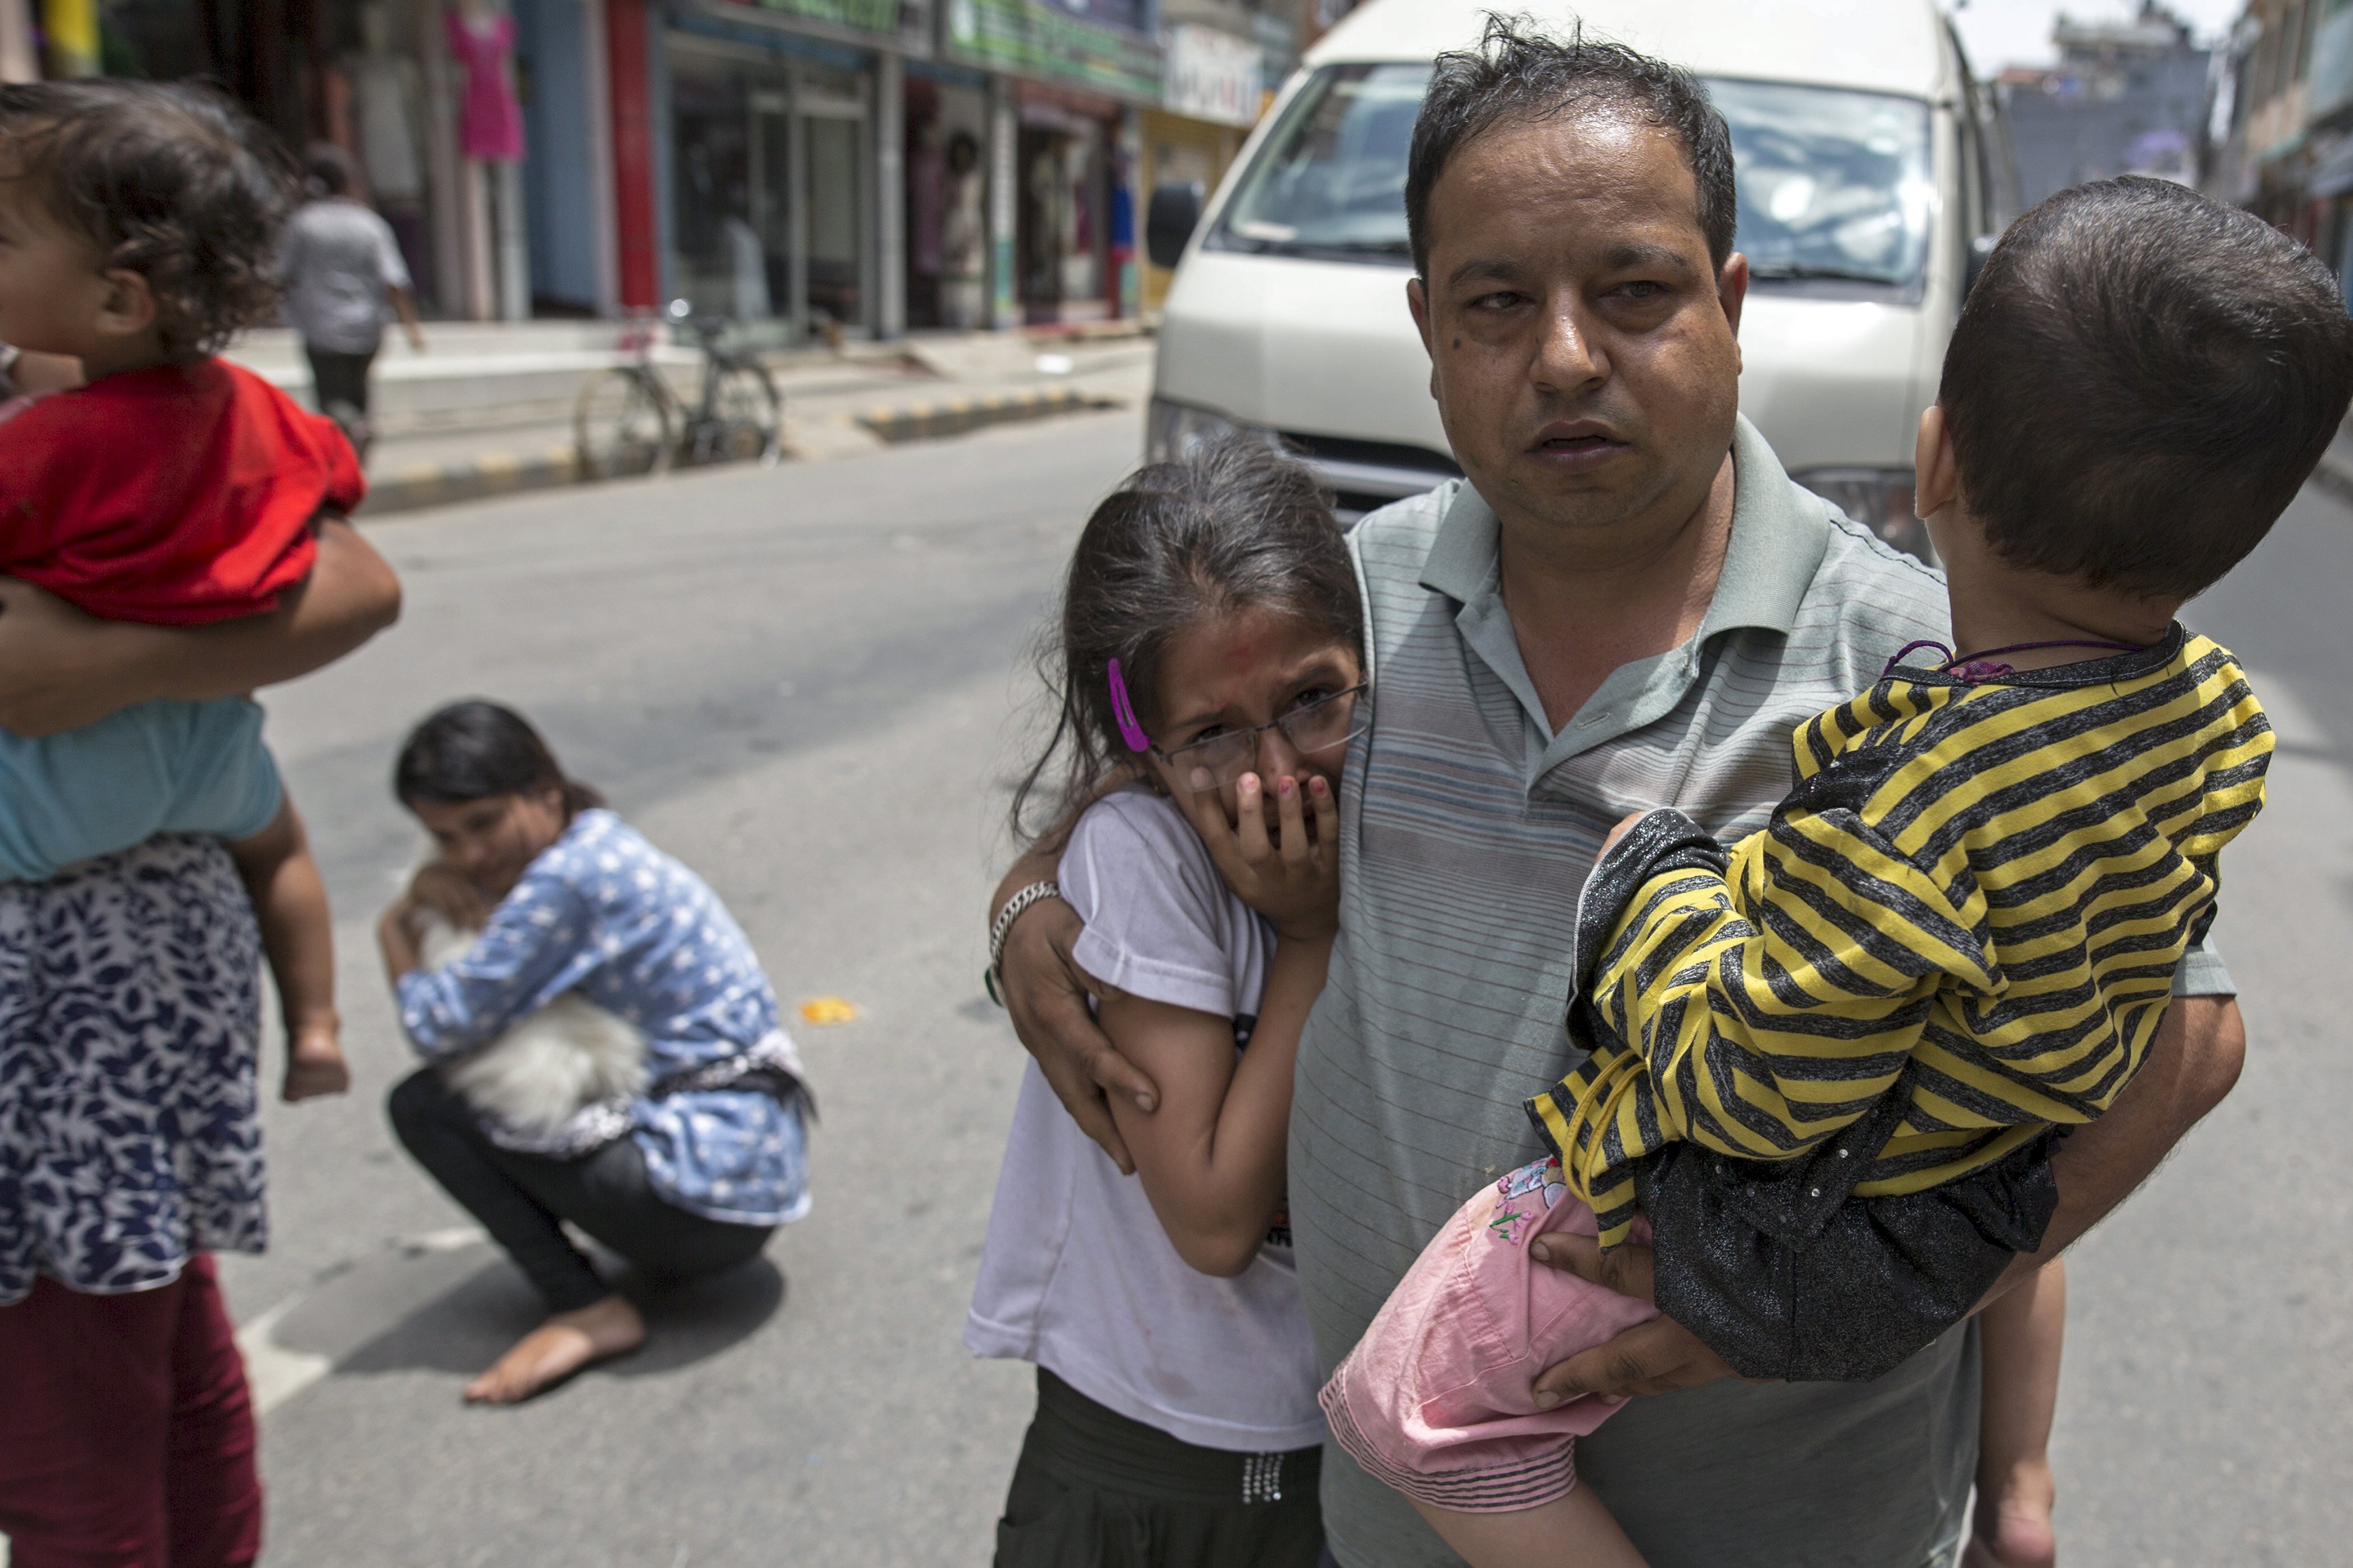 In Pictures: Fear Surfaces As New Nepal Earthquake Brings People On Streets